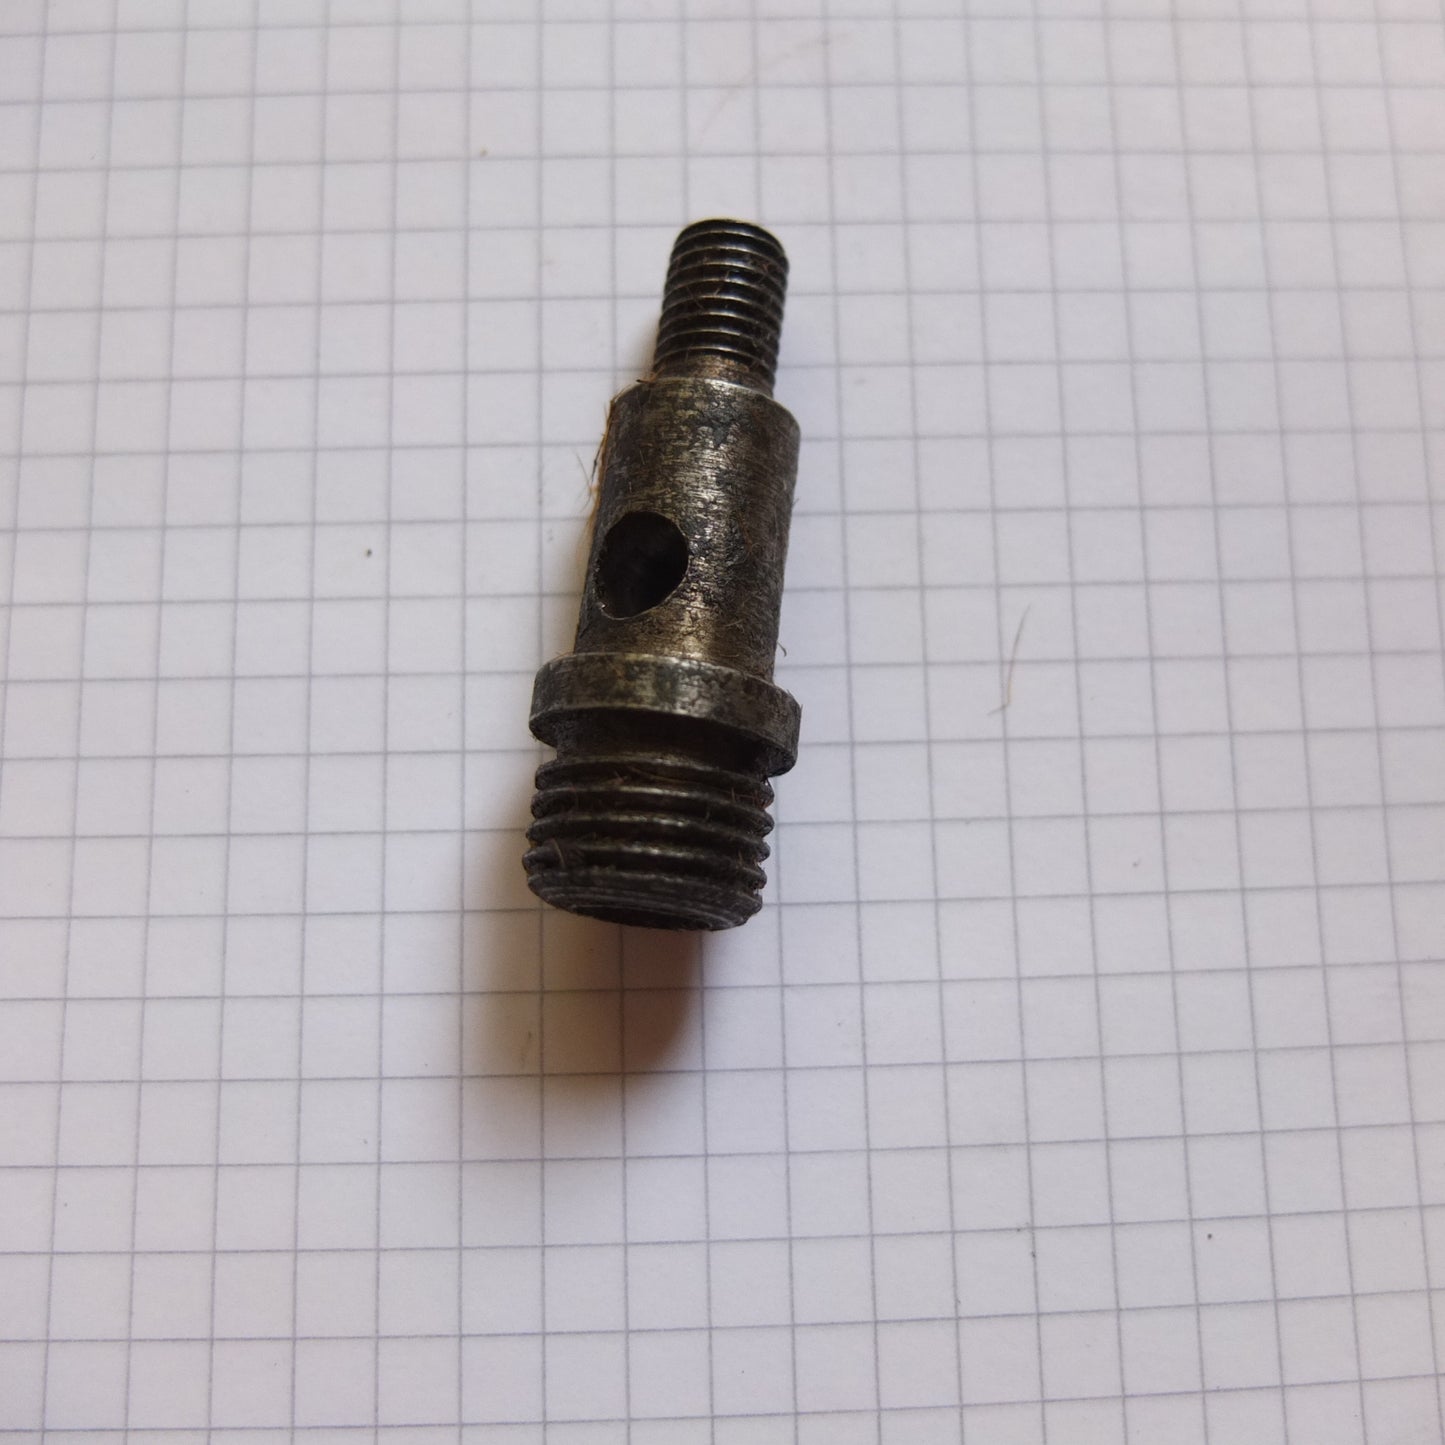 P1/029 Oil by-pass stud